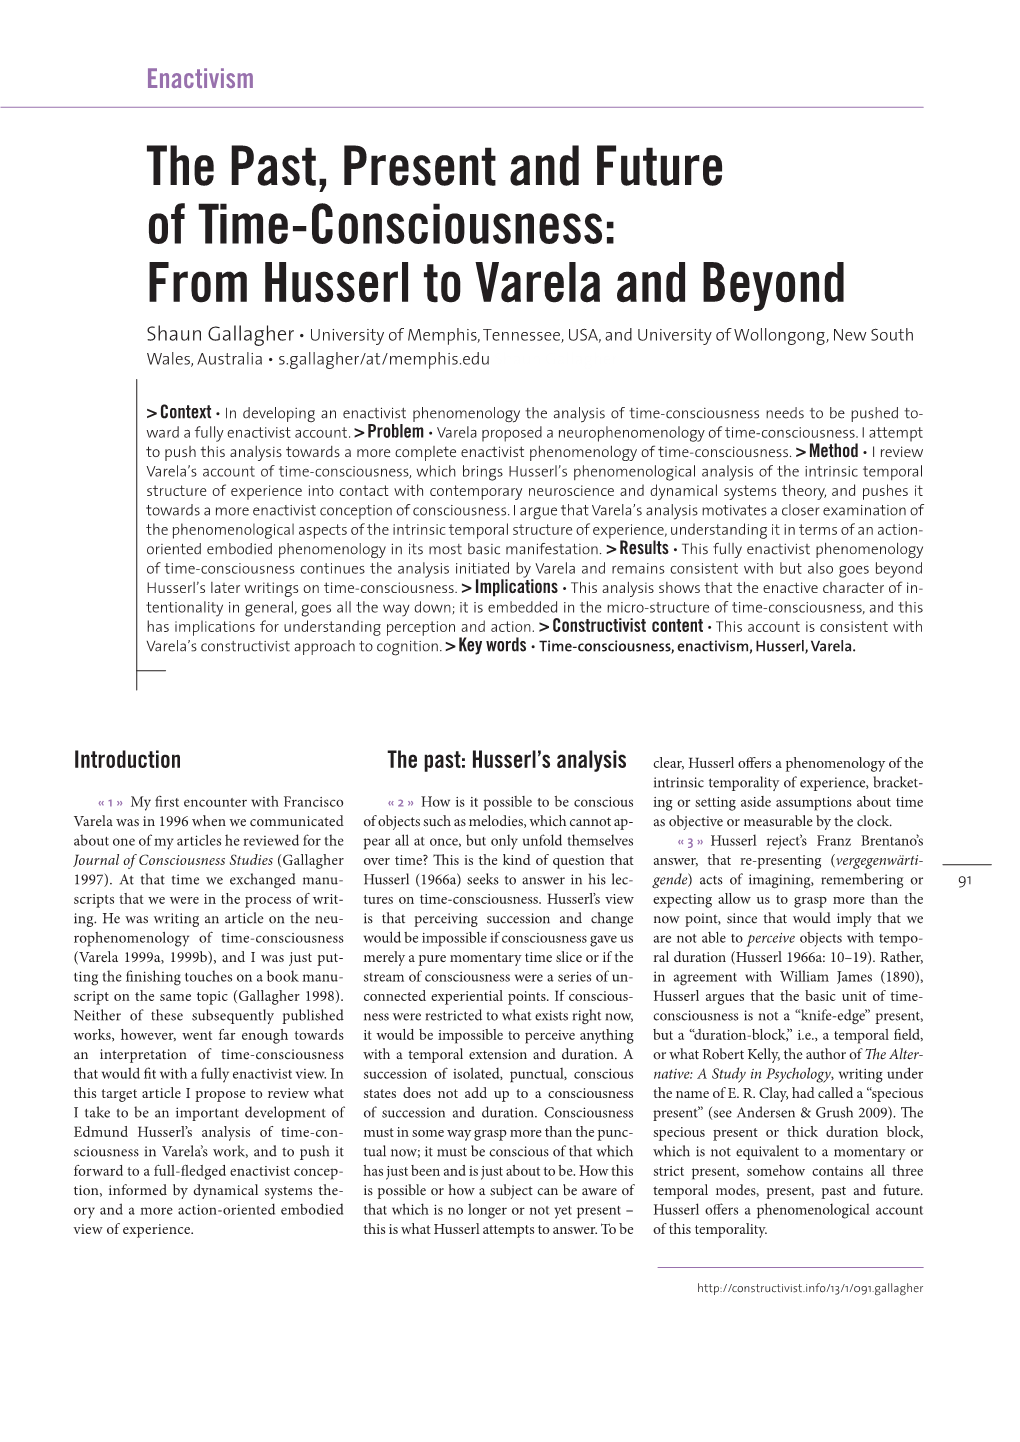 The Past, Present and Future of Time-Consciousness: from Husserl to Varela and Beyond